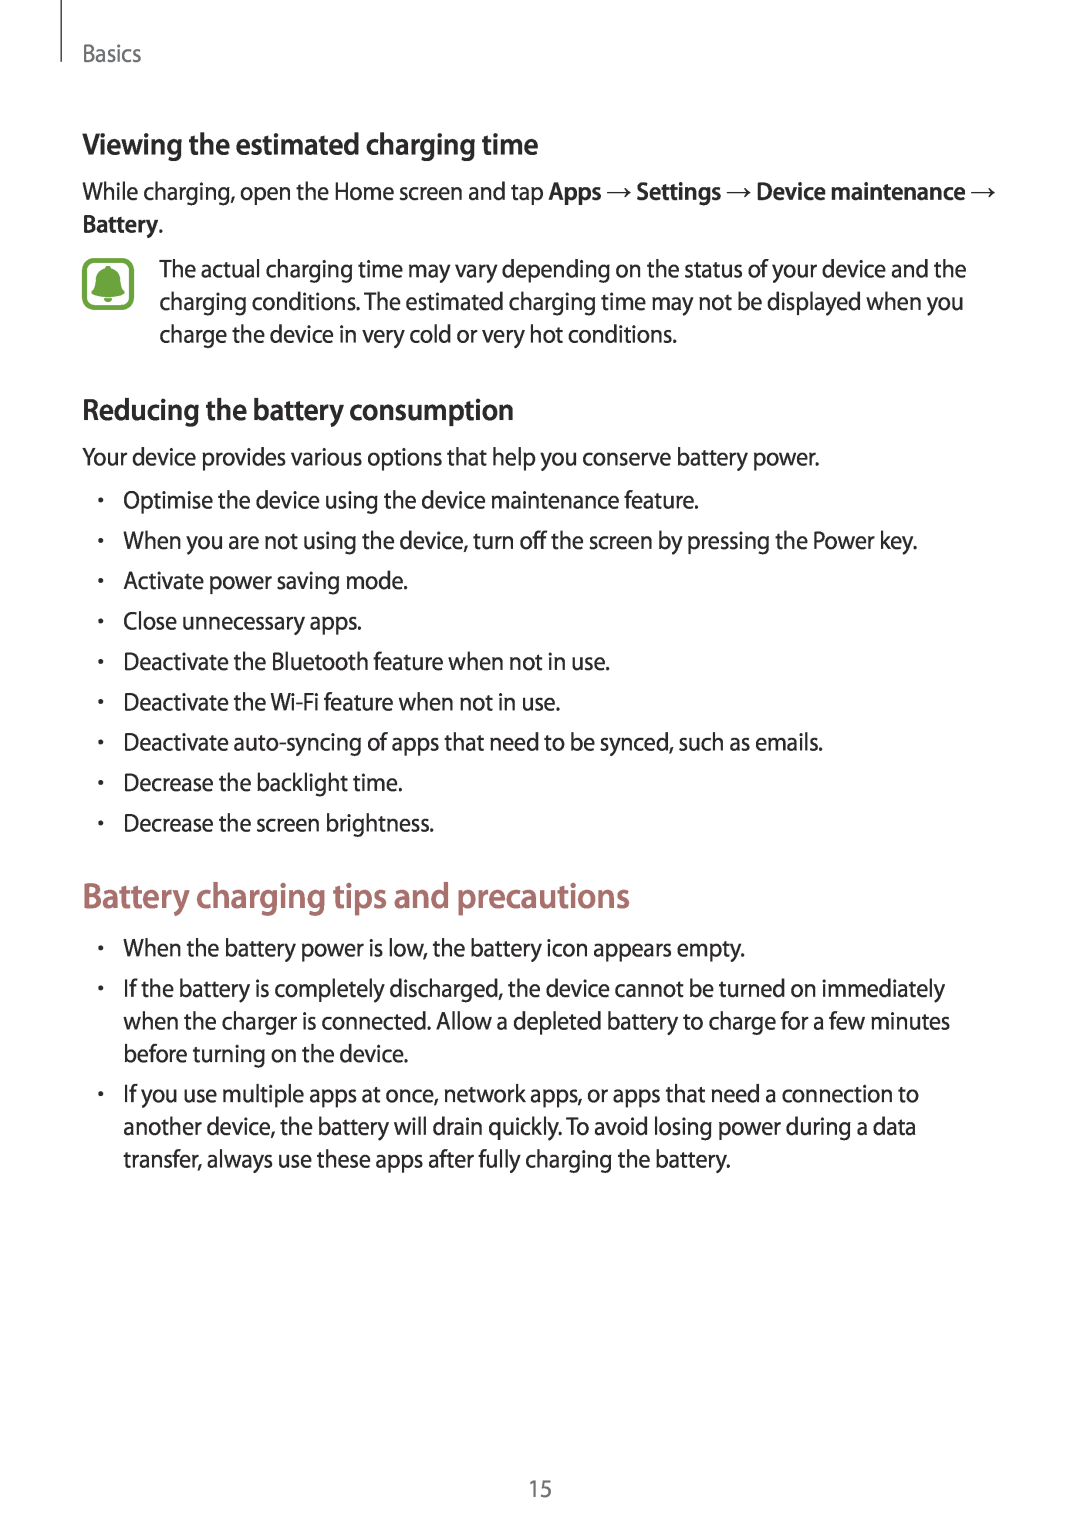 Samsung SM-G928FZKAXEF, SM-G925FZKADBT Battery charging tips and precautions, Viewing the estimated charging time, Basics 